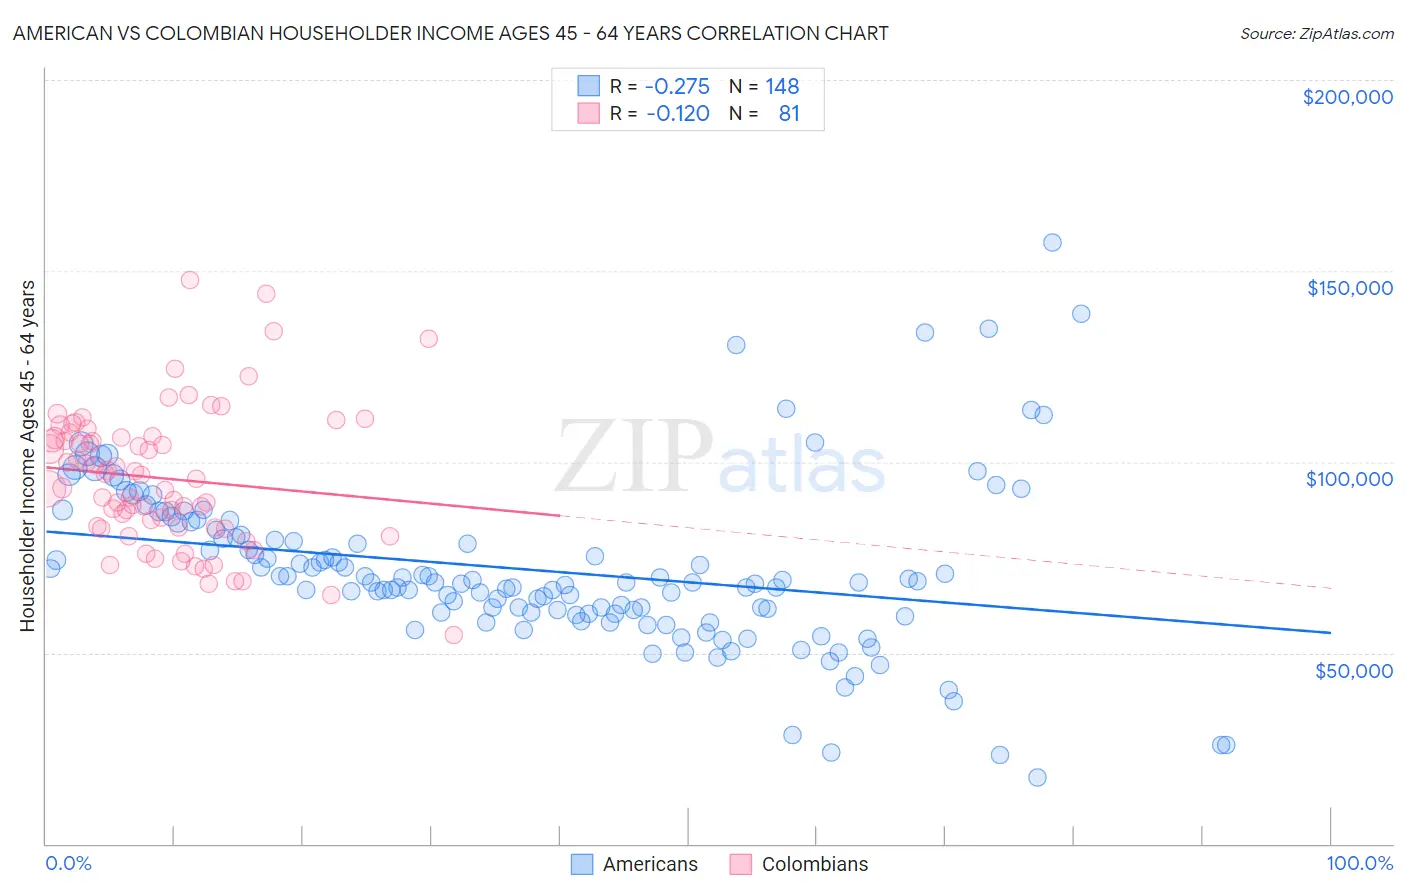 American vs Colombian Householder Income Ages 45 - 64 years